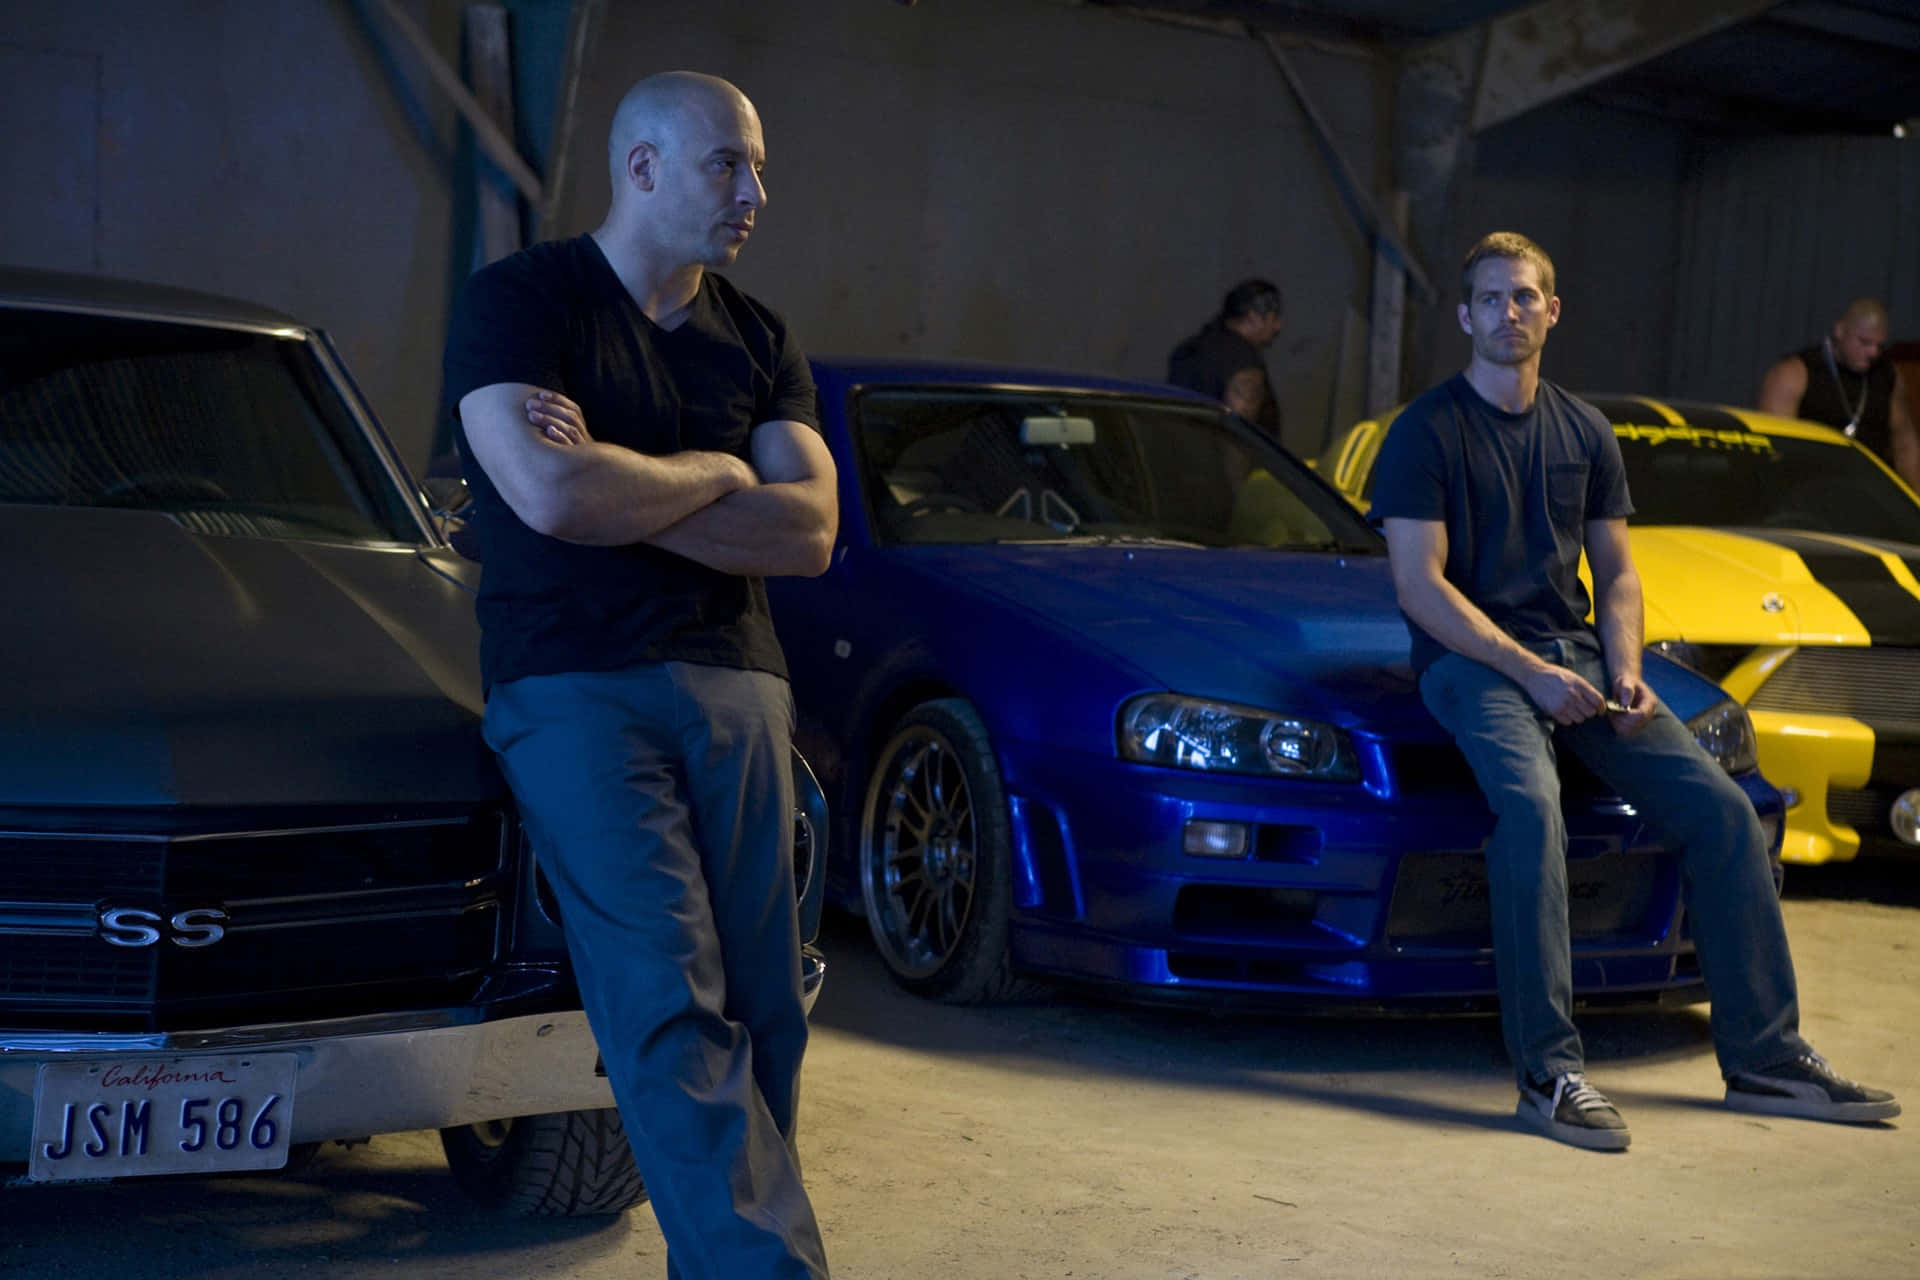 Dom Toretto and company take to the streets in ‘Fast&Furious’